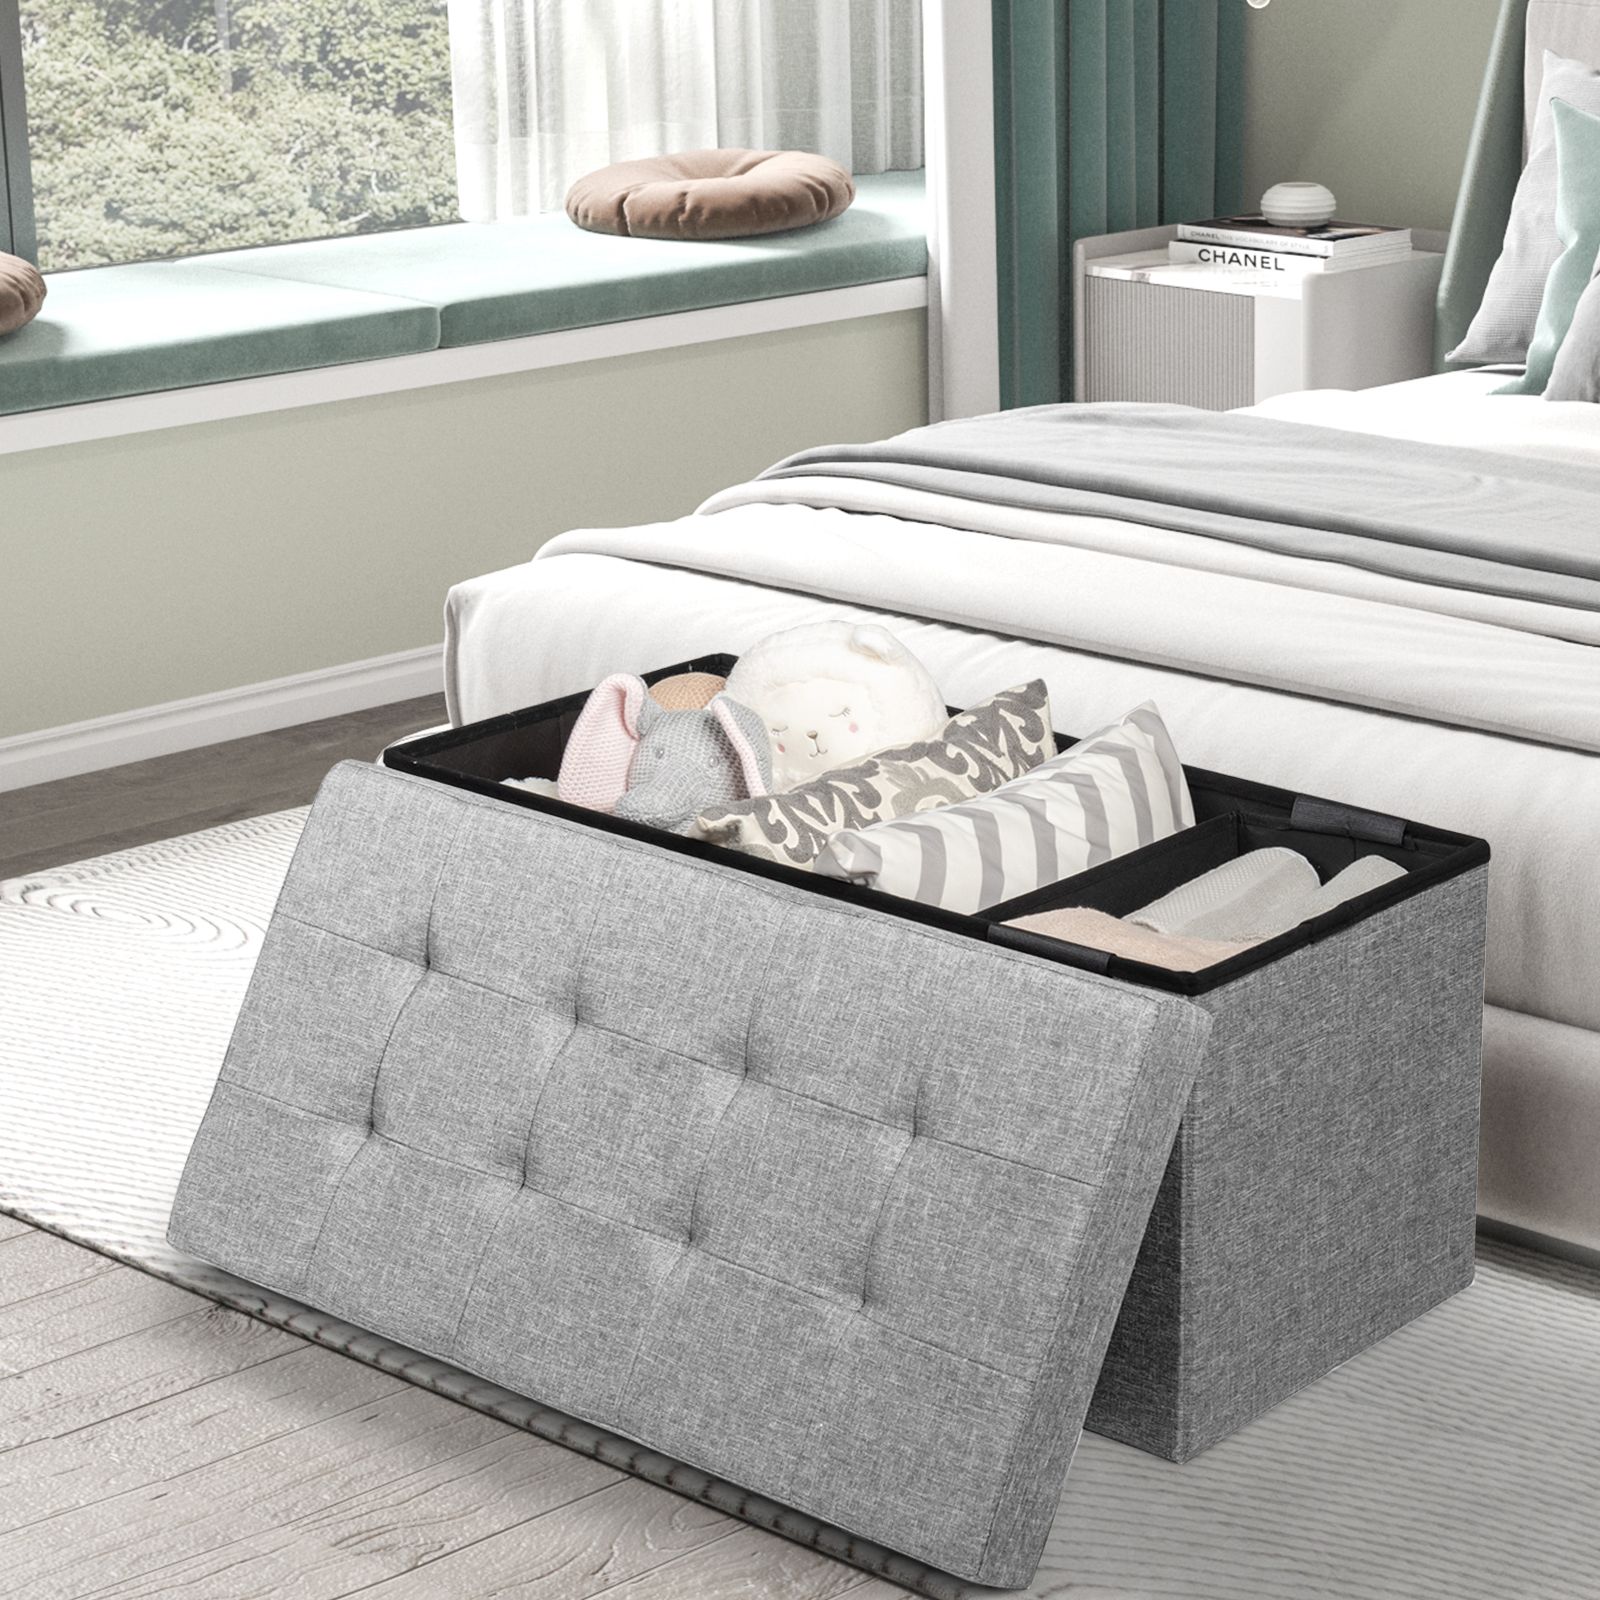 Fabric Foldable Storage Ottoman with Padded Seat for Living Room Light Grey